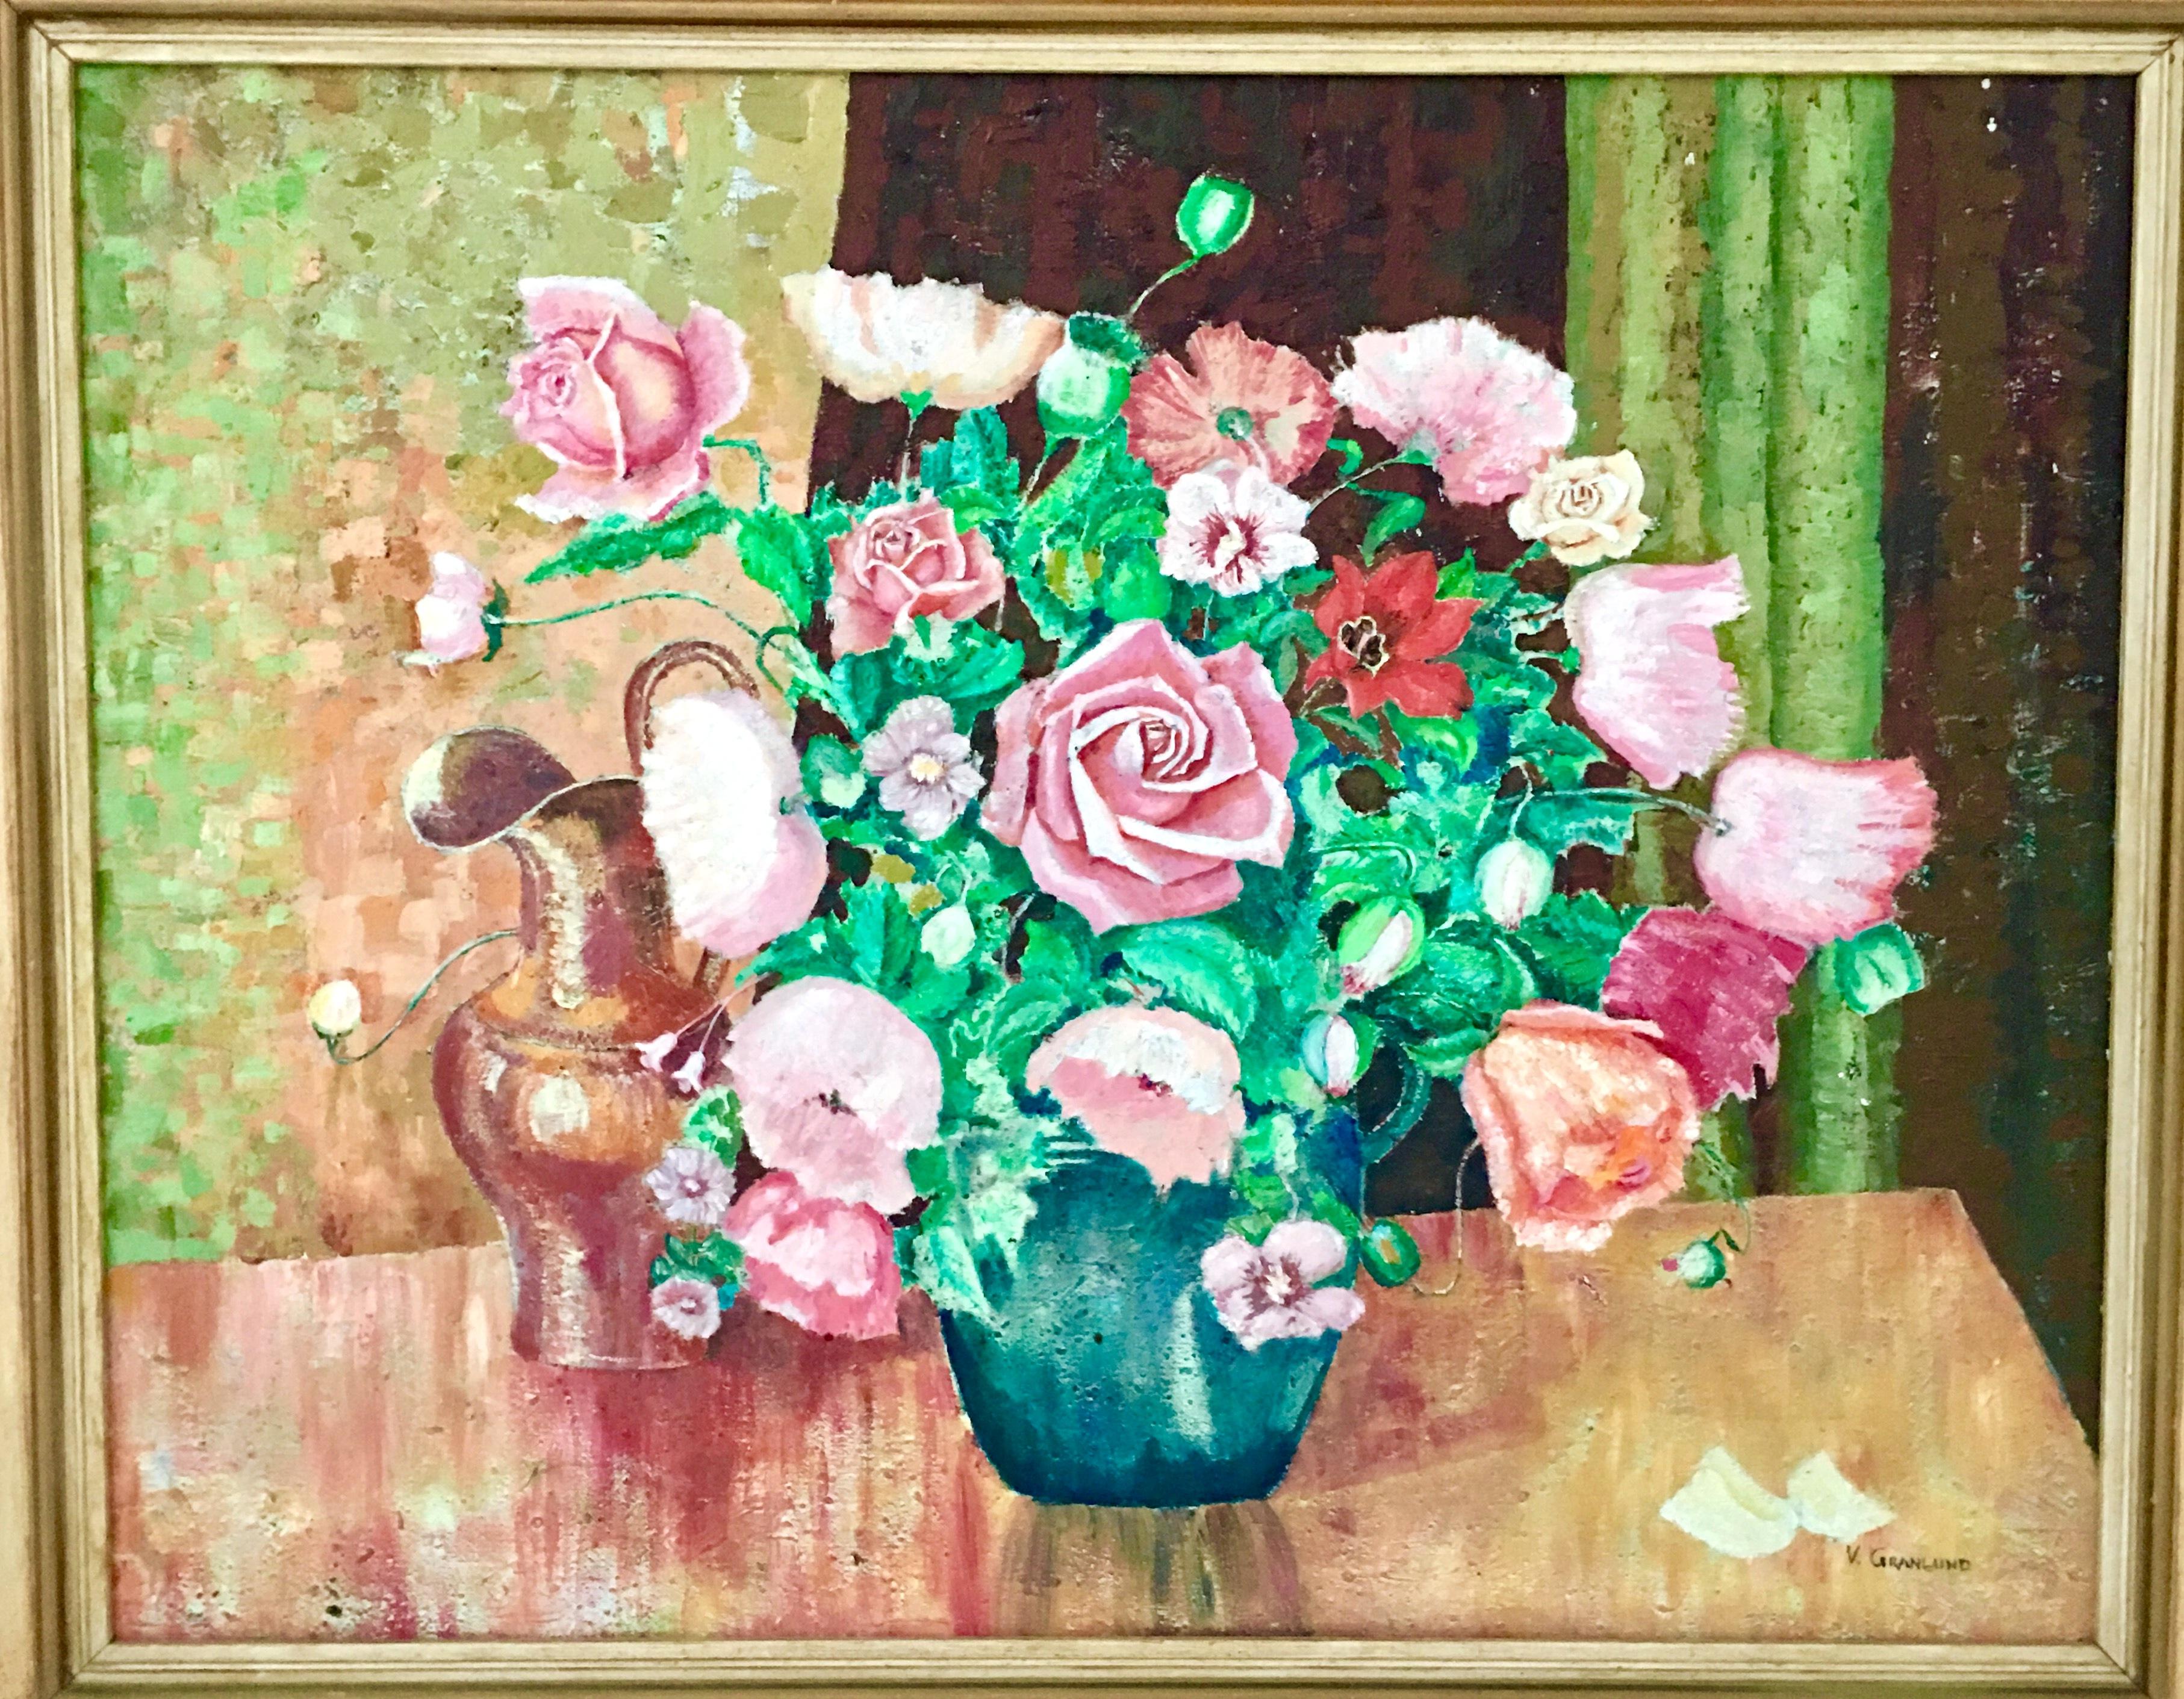 20th century original oil on canvas painting by, V. Granland. This still life work of art features a textured technique and depicts a vase of flowers on a table executed in bright green, pink and coral. Artist-signed lower right, V. Granland. Framed